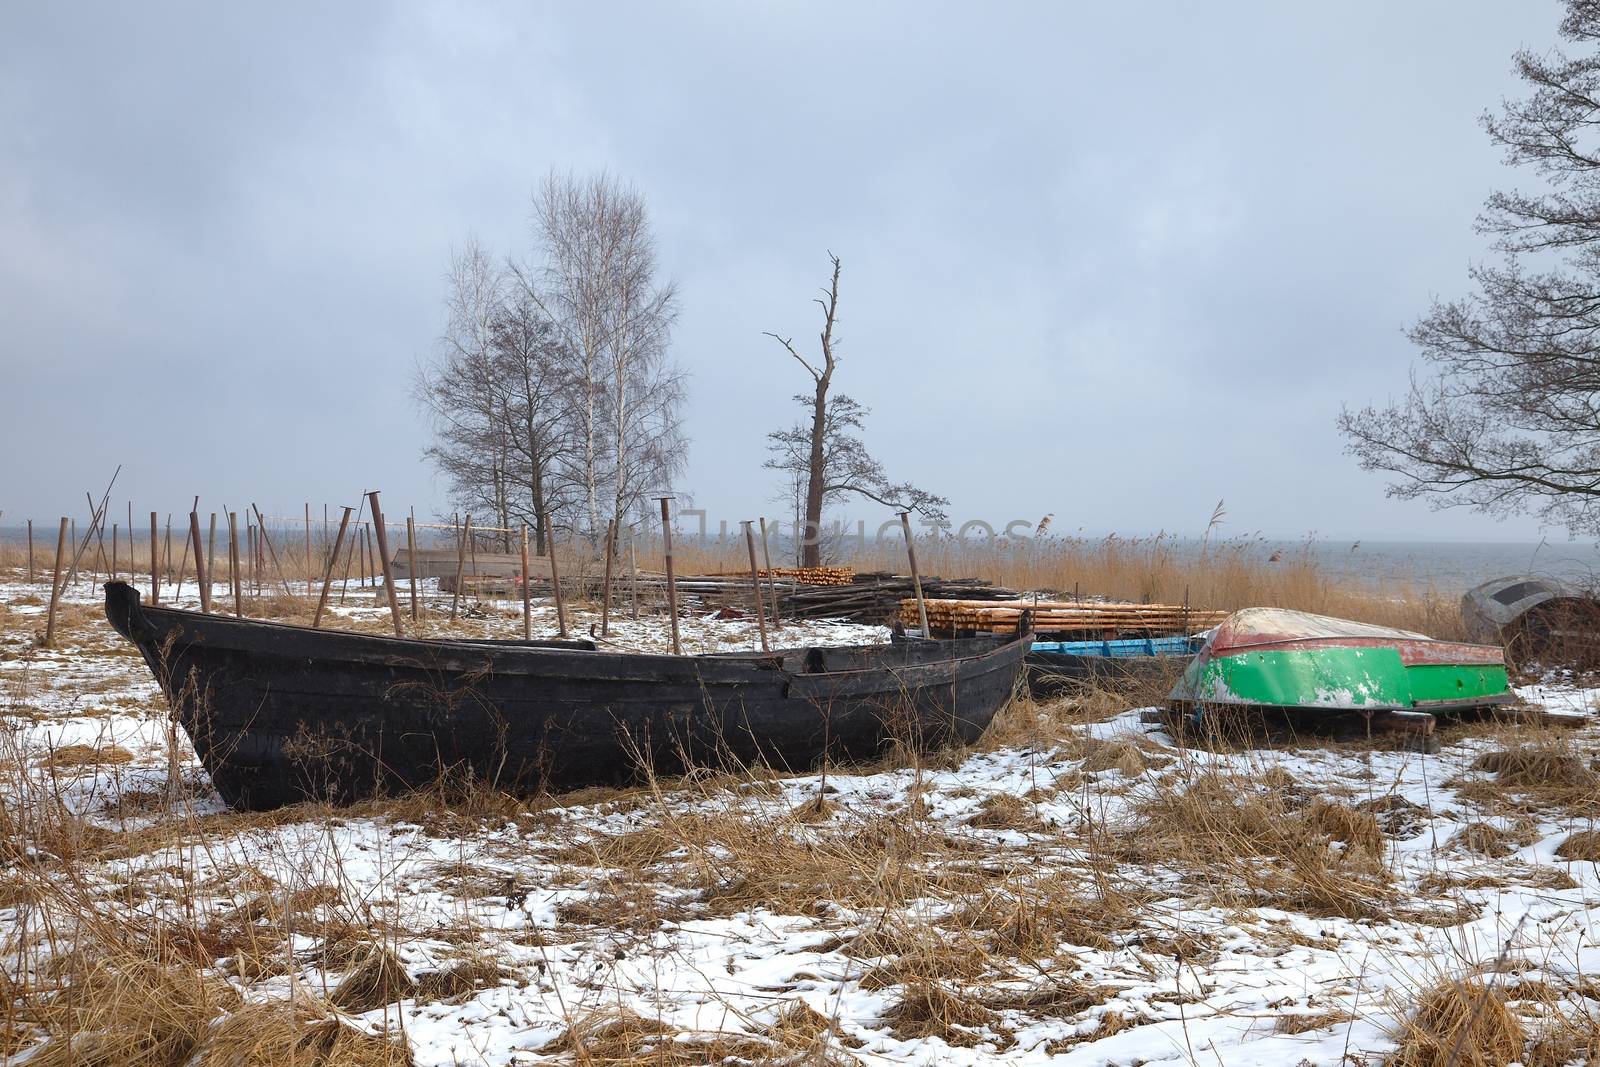 Boats on the hore in winter